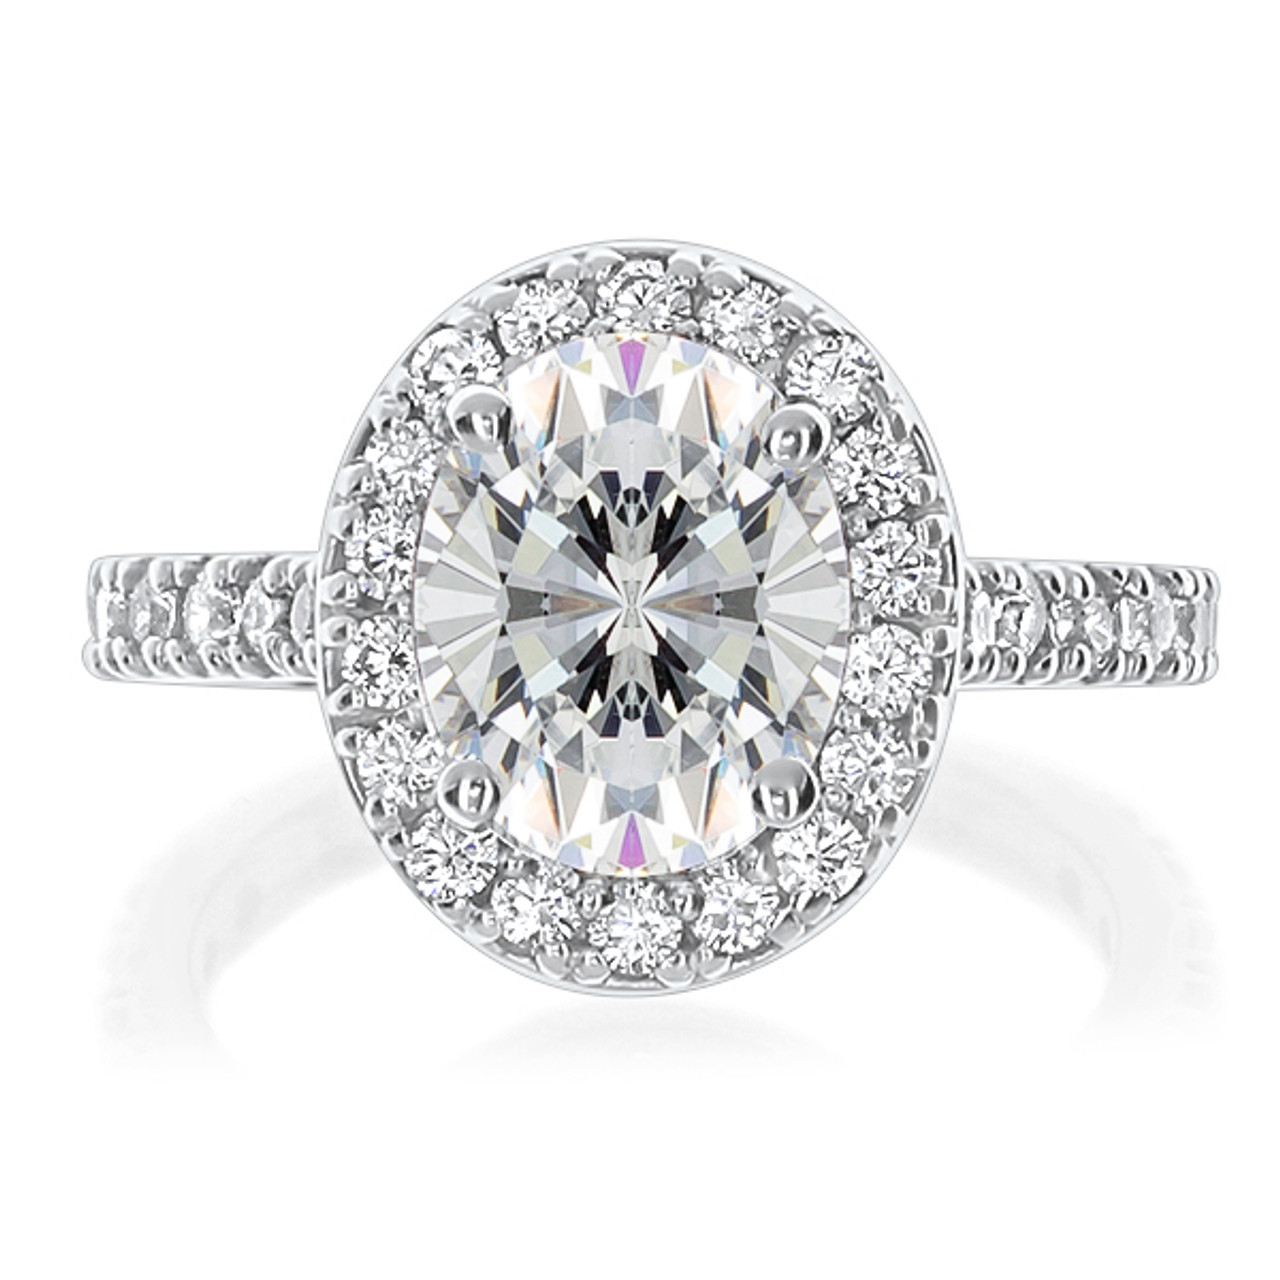 2526V2.5WCD OVAL HALO ENGAGEMENT RING 32355.1554756580